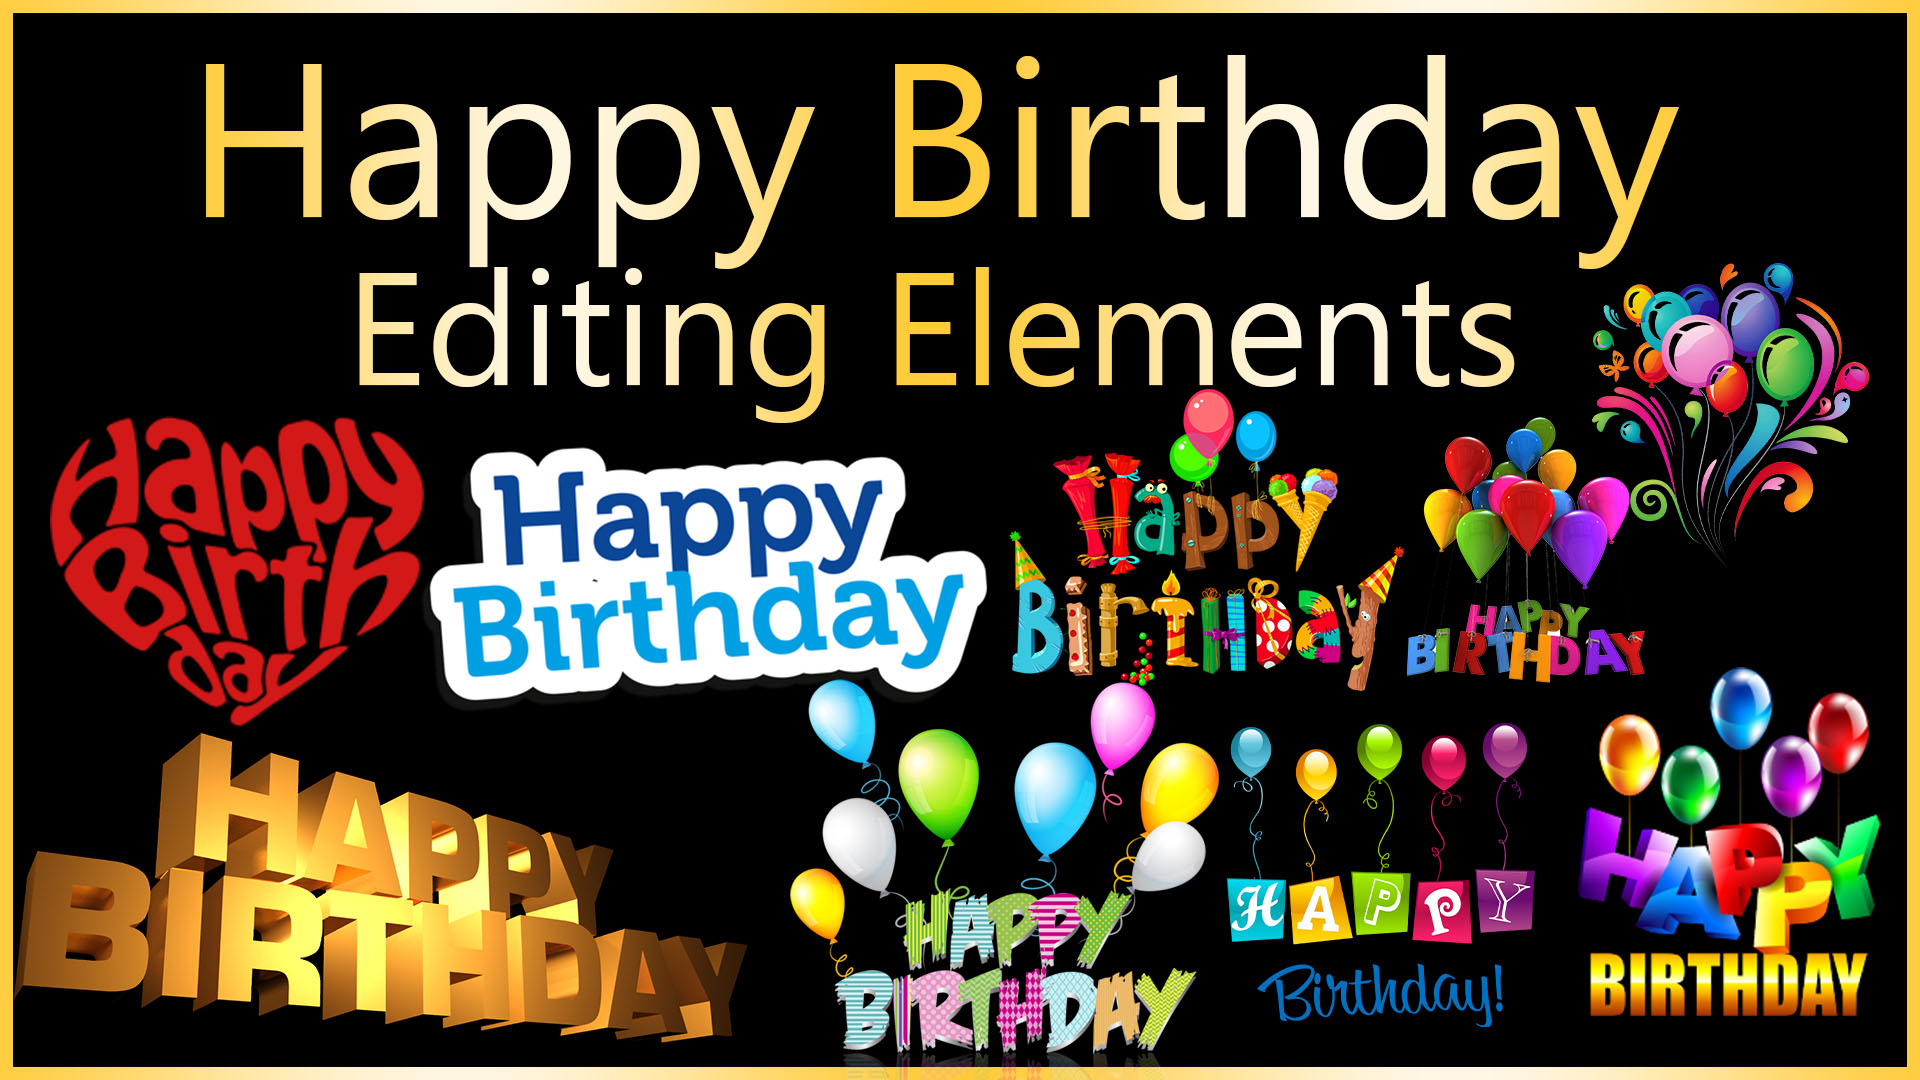 Happy Birthday PNG Cut Out Editing Material Download Here